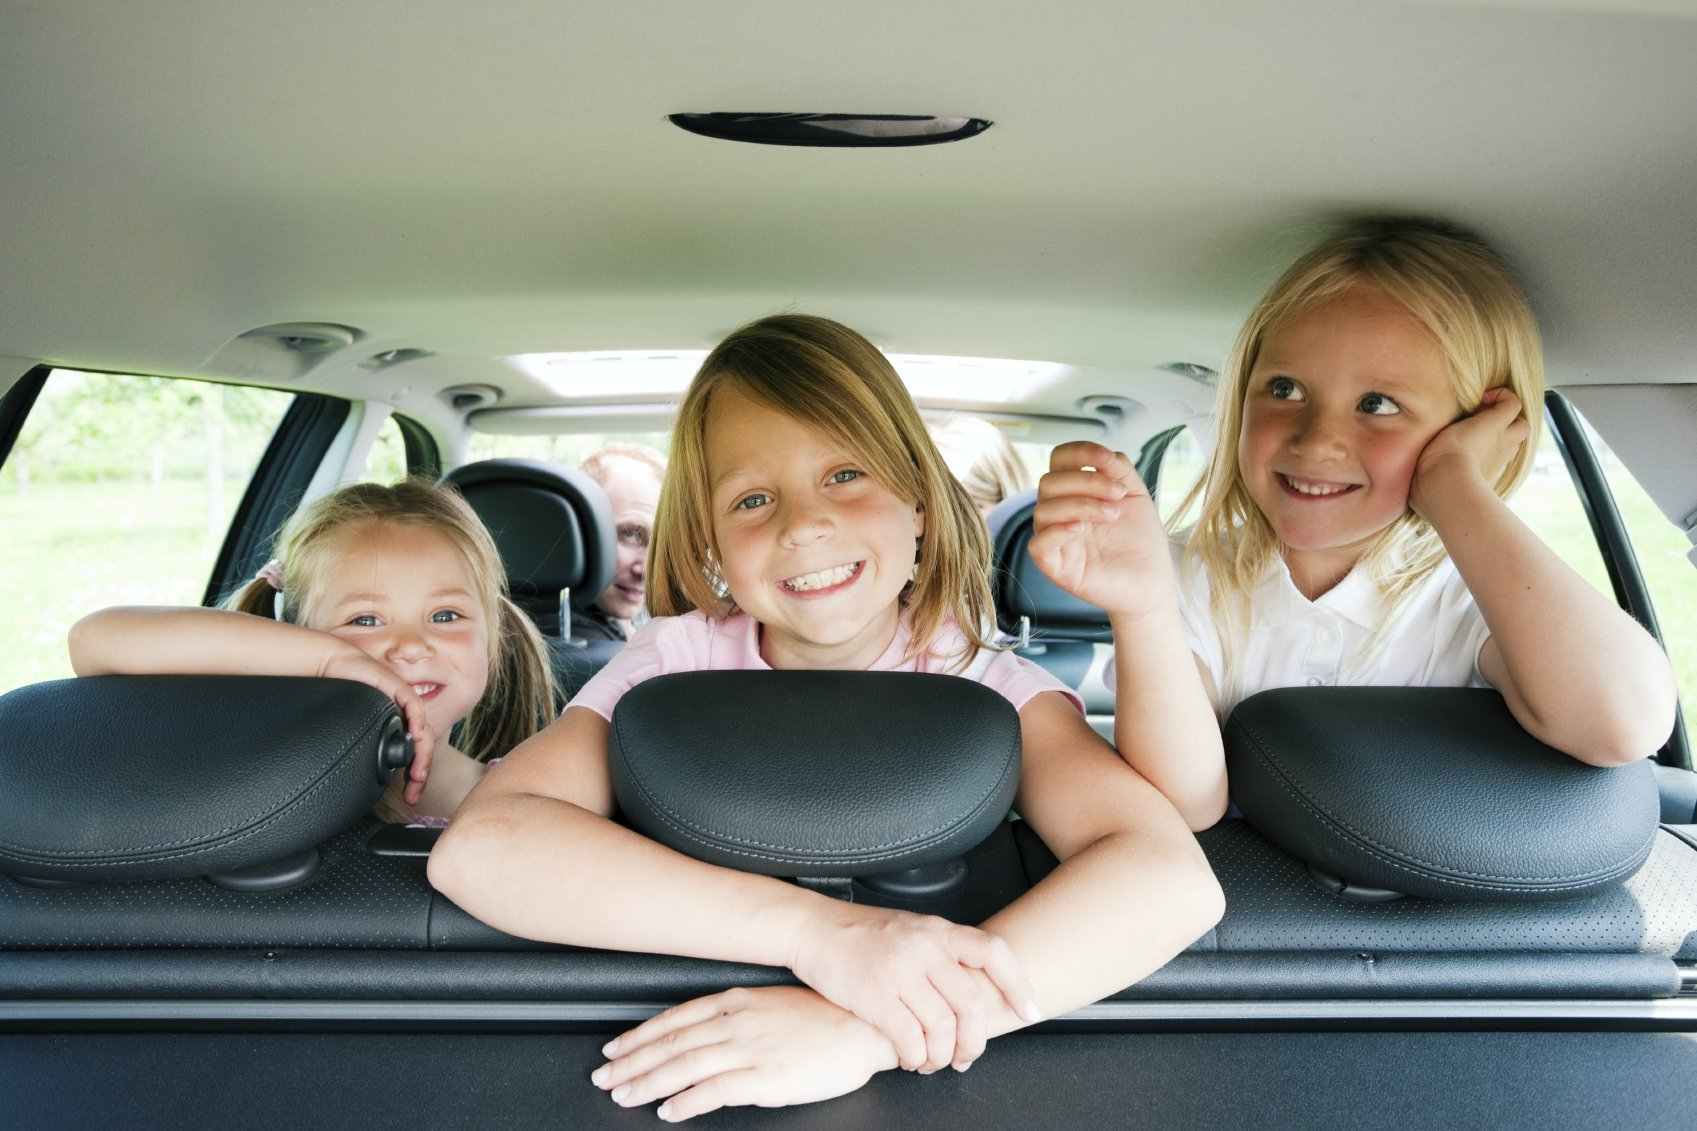 Transfers to Ferrera Park Apartments with car baby seats